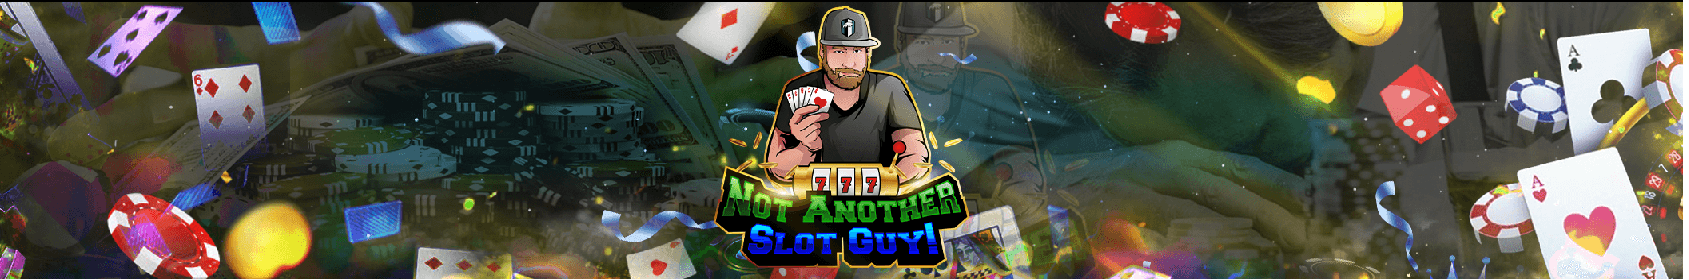 Not Another Slot Guy